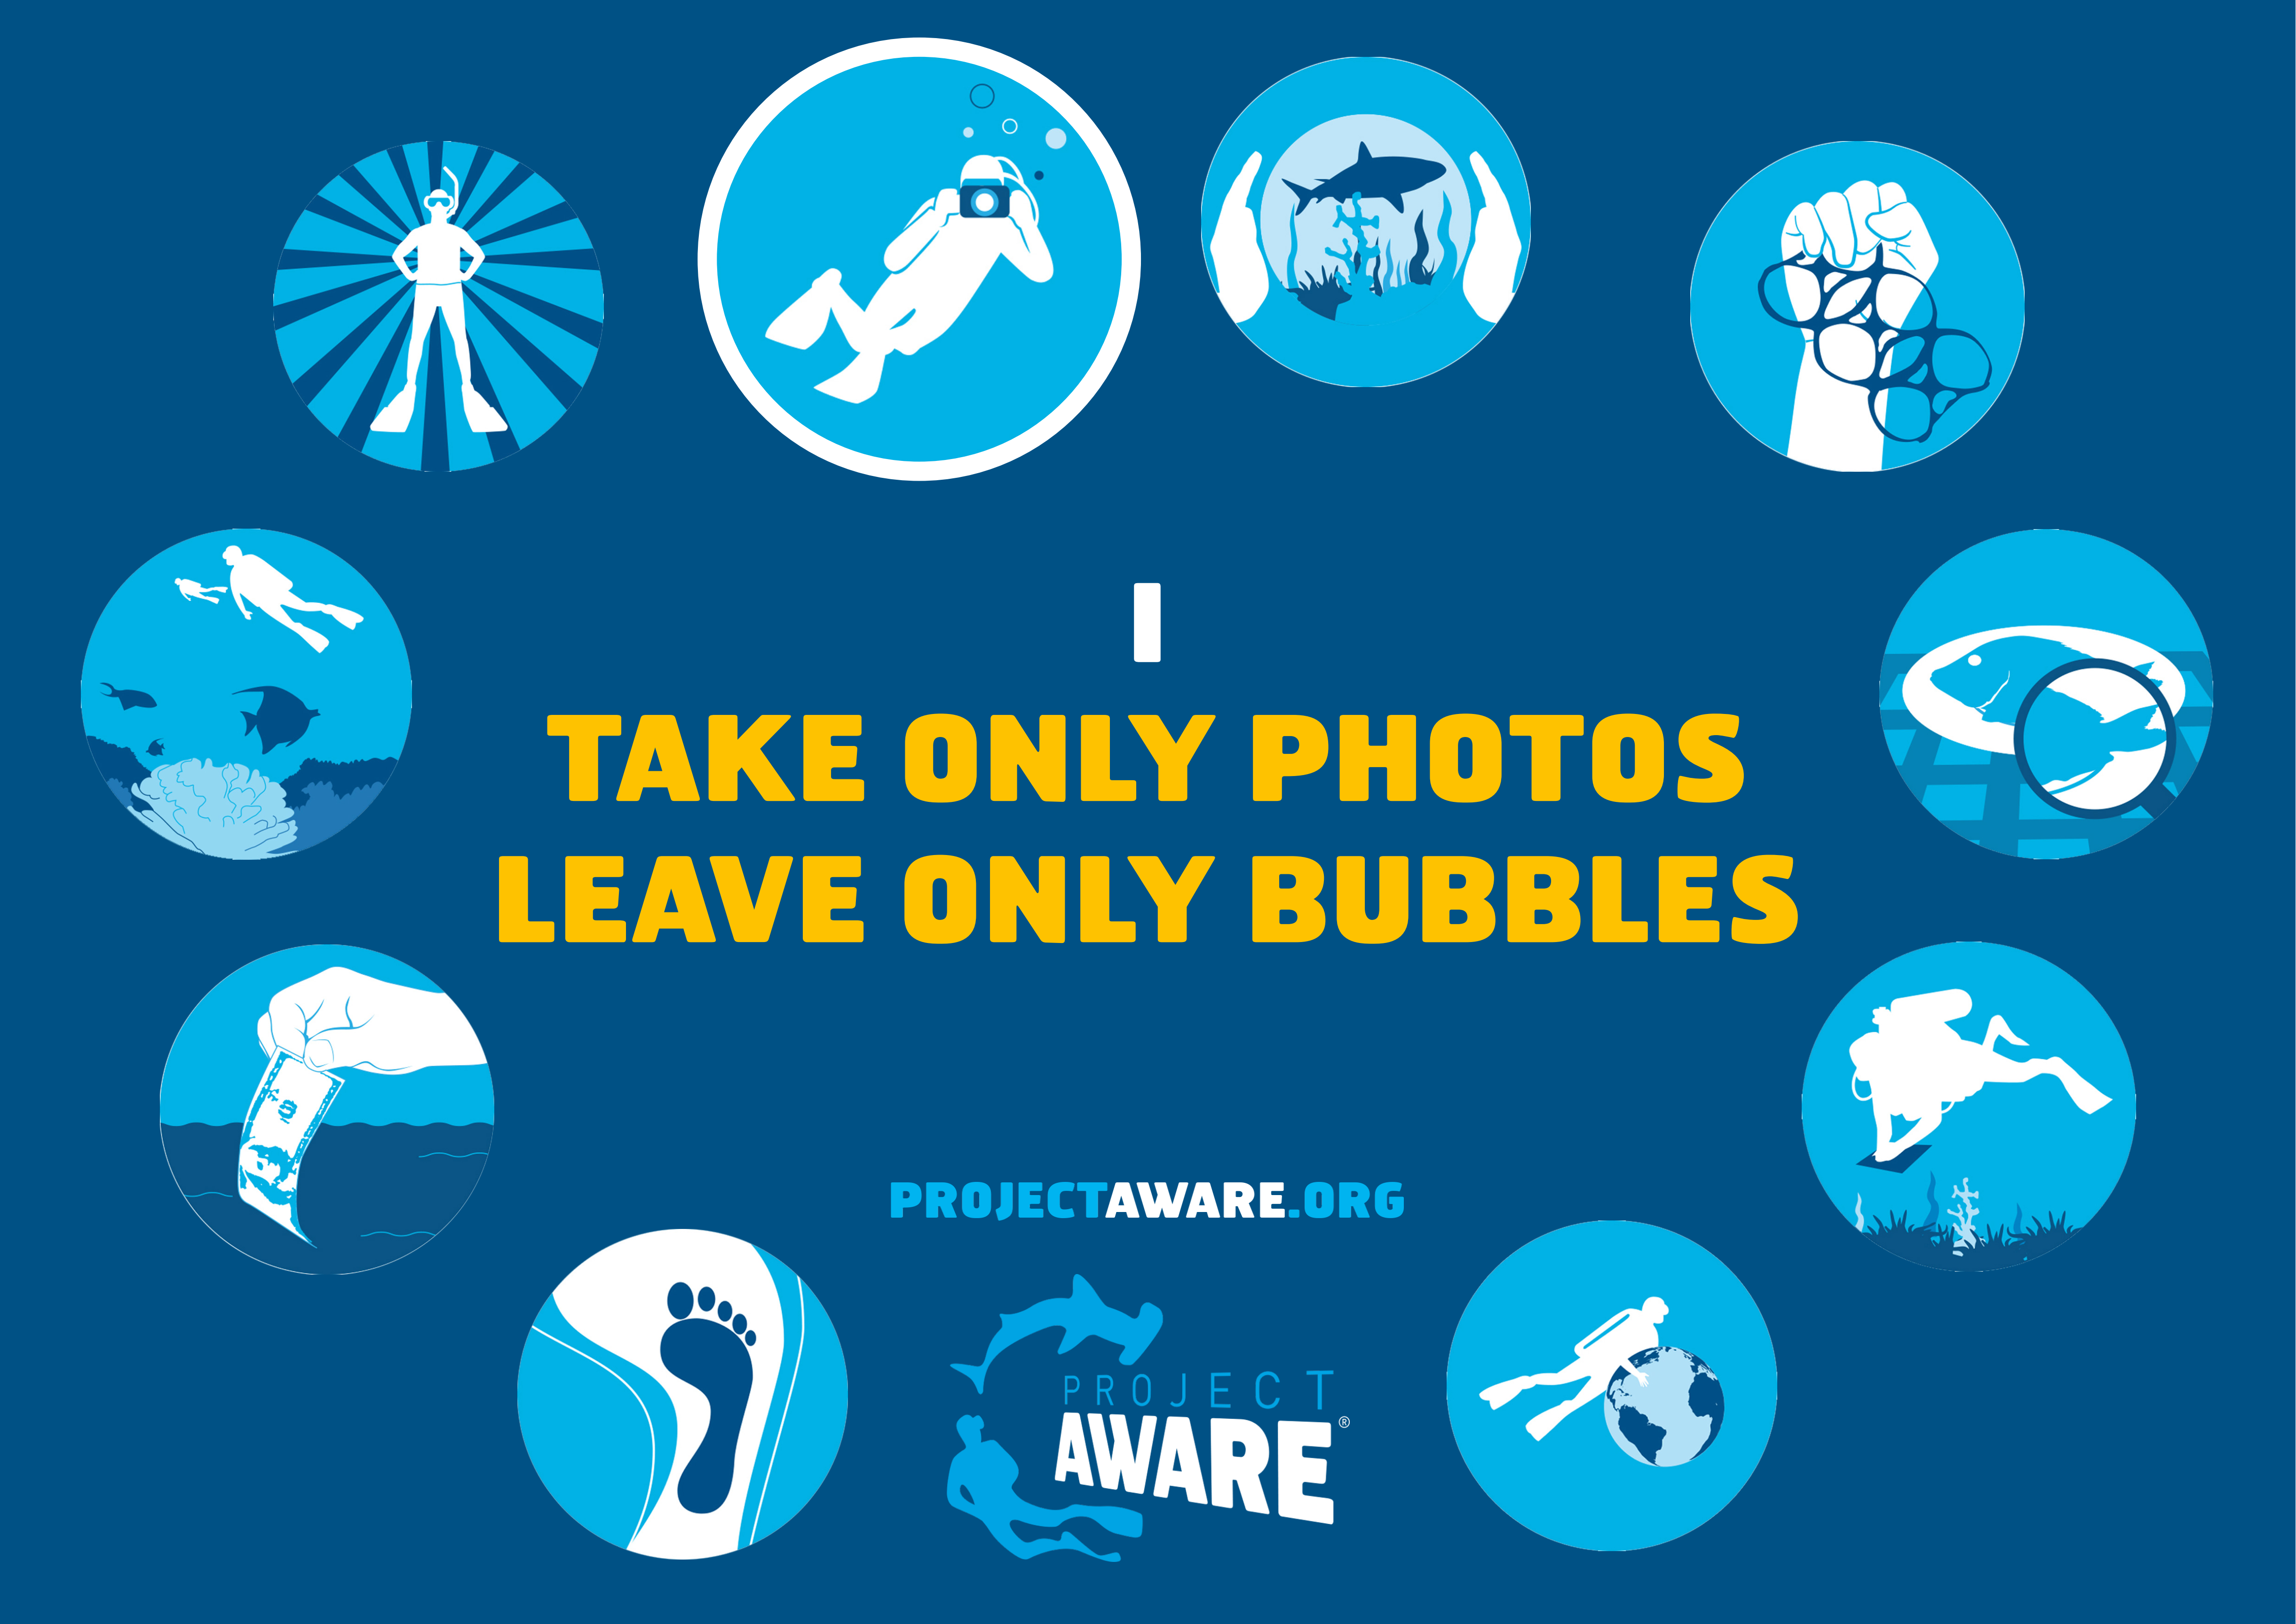 10 tips - leave only bubbles